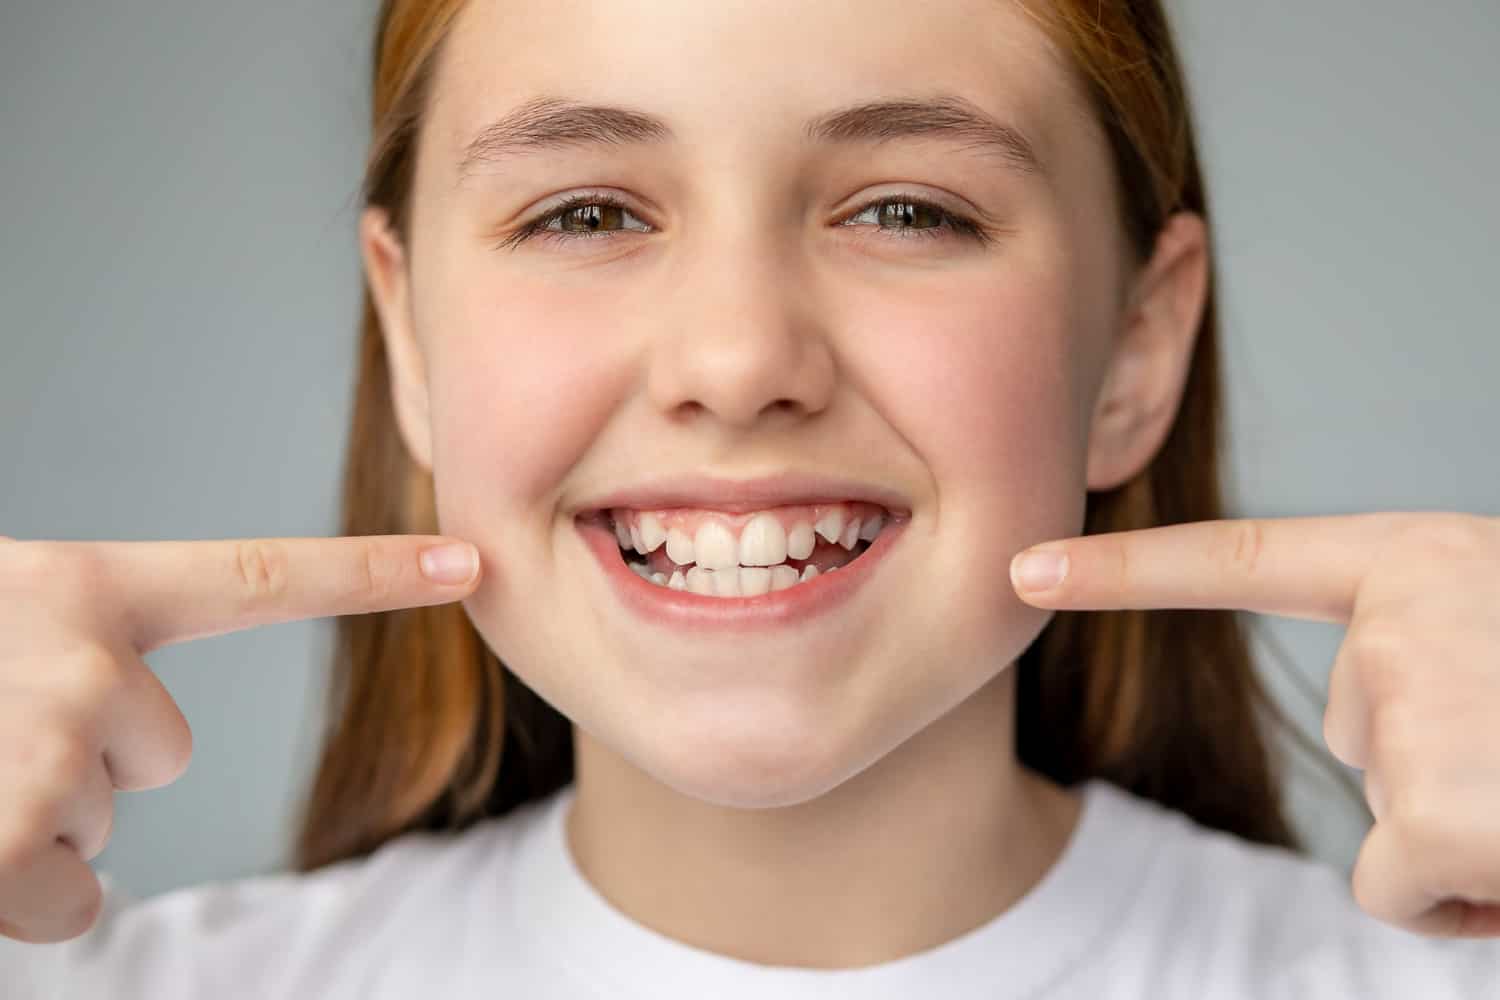 how to fix messed up teeth without braces